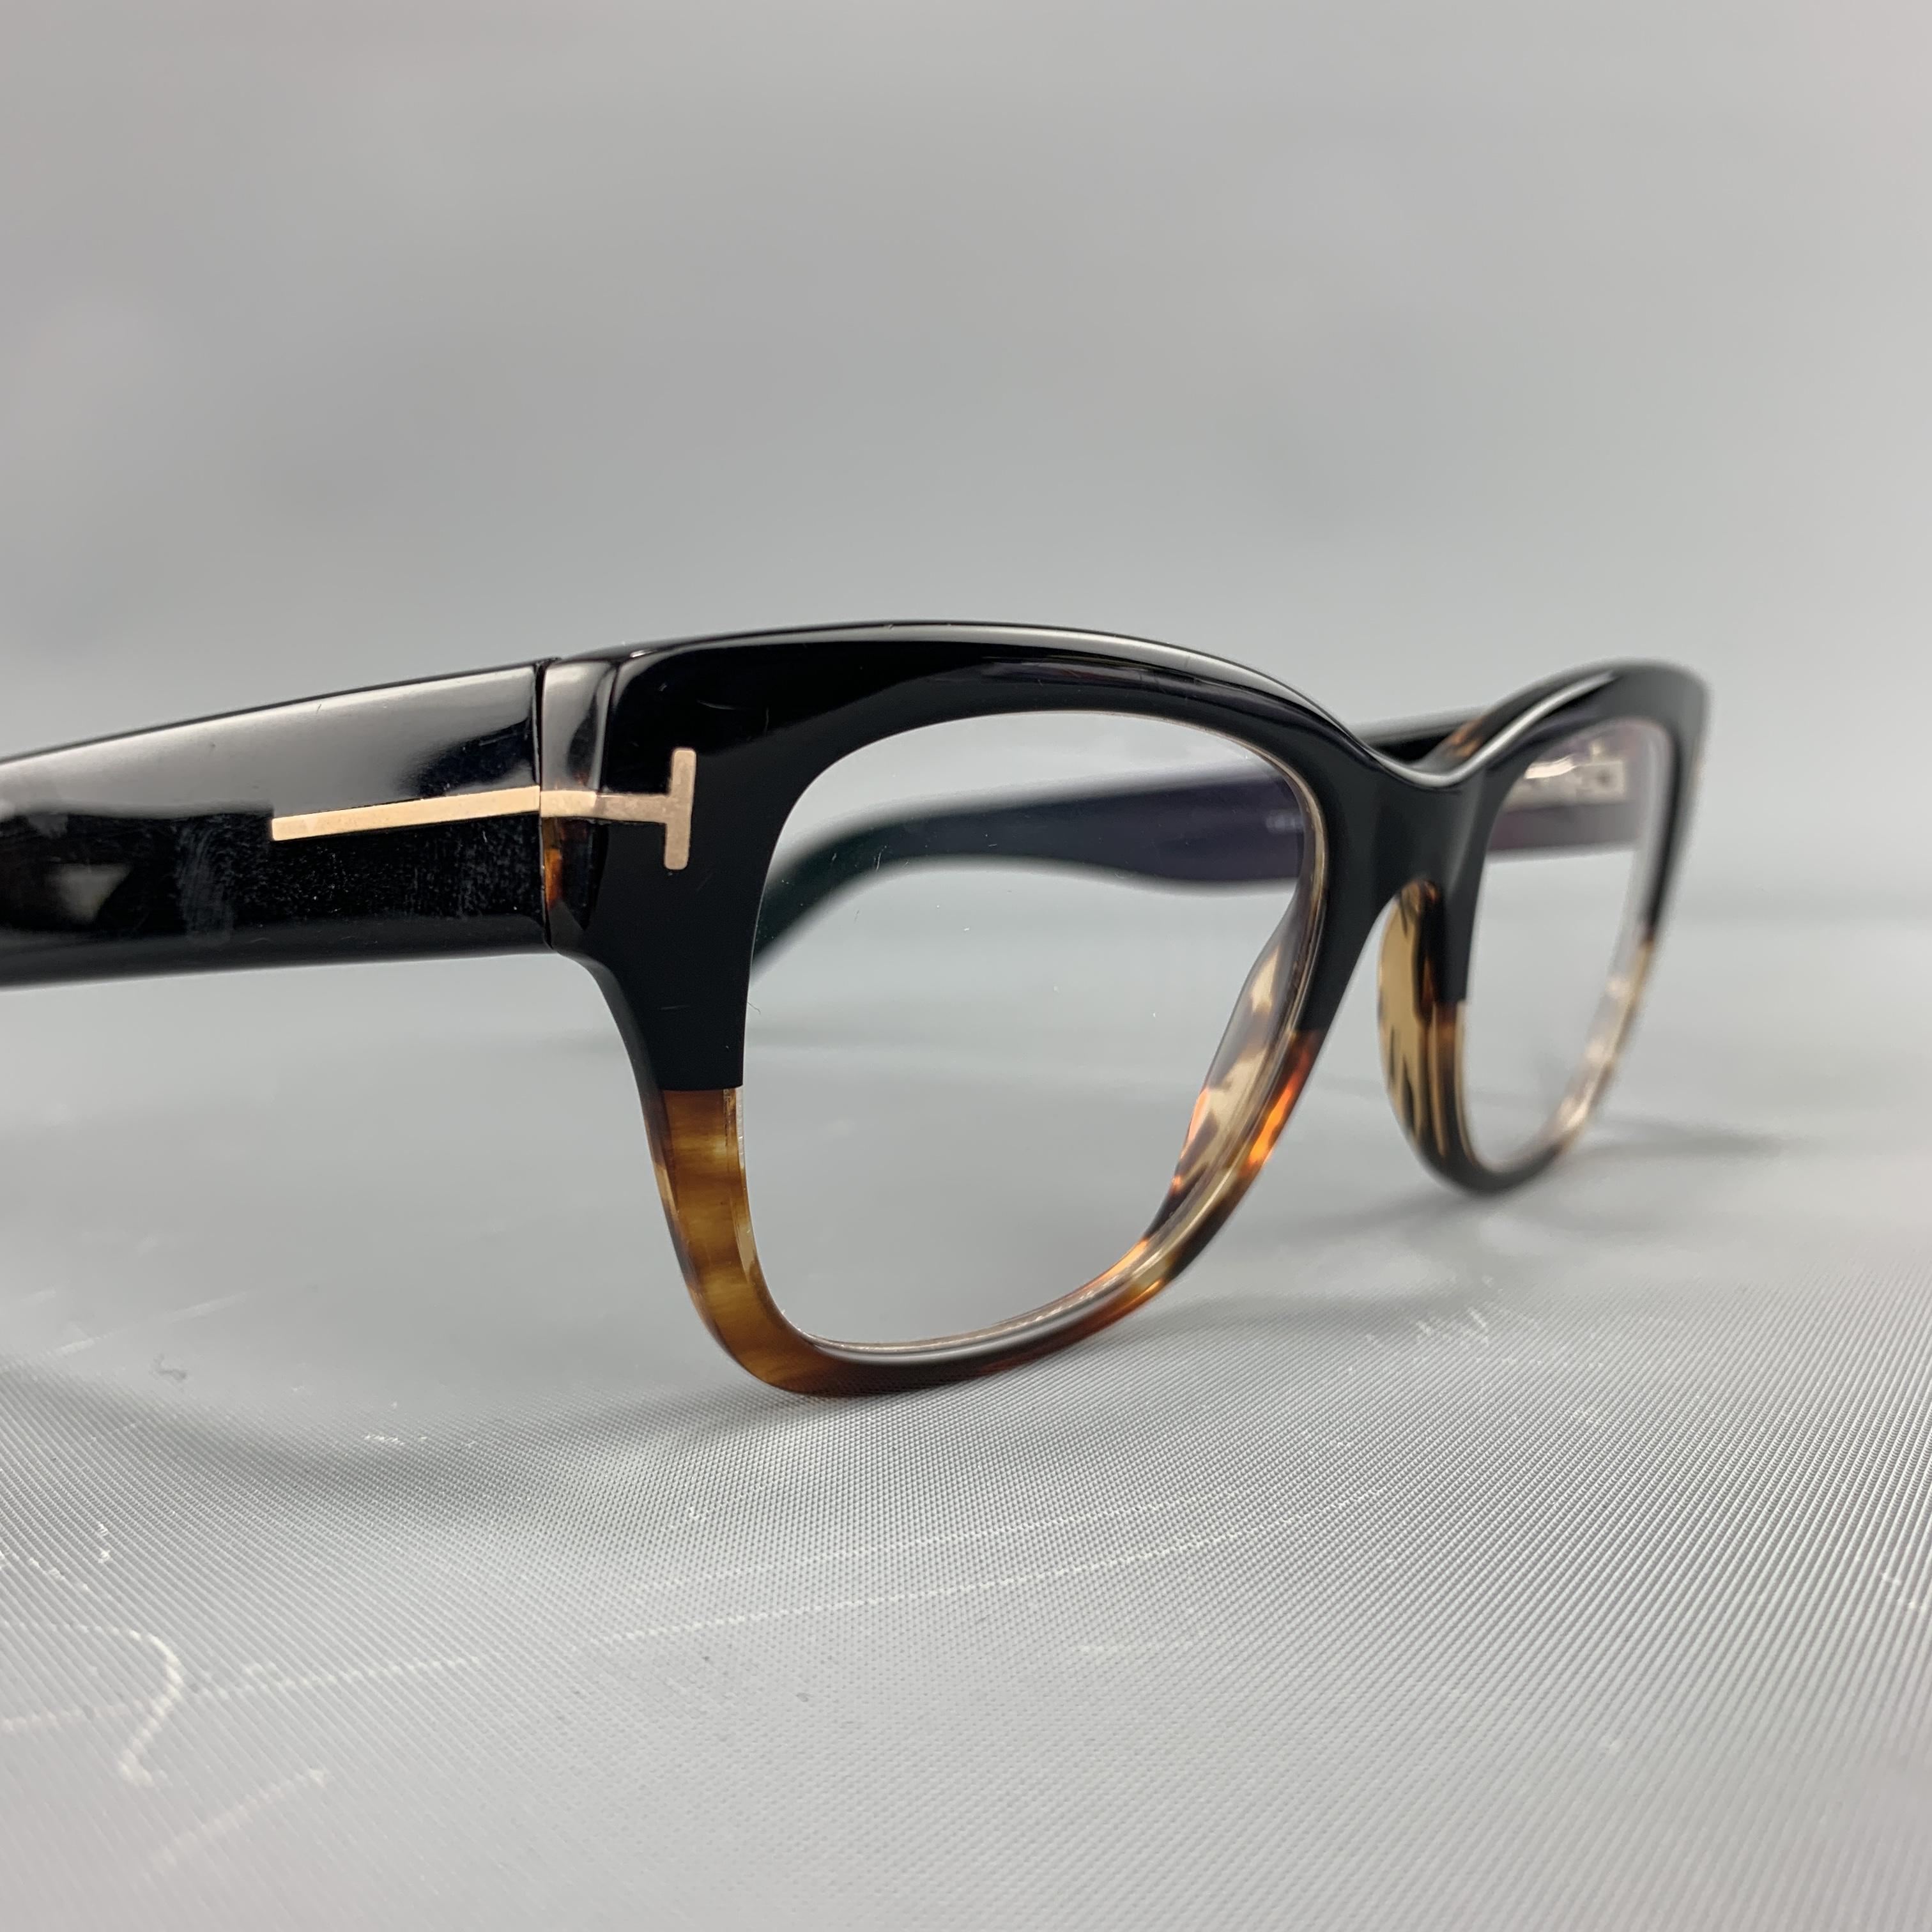 TOM FORD eyeglasses come in black and brown ombre acetate with a retro look. Prescription added As-is. With case.

Excellent Pre-Owned Condition.
Marked: TF5379 005 51 20 145

Measurements:

Length: 14 cm.
Height:  4.5 cm.